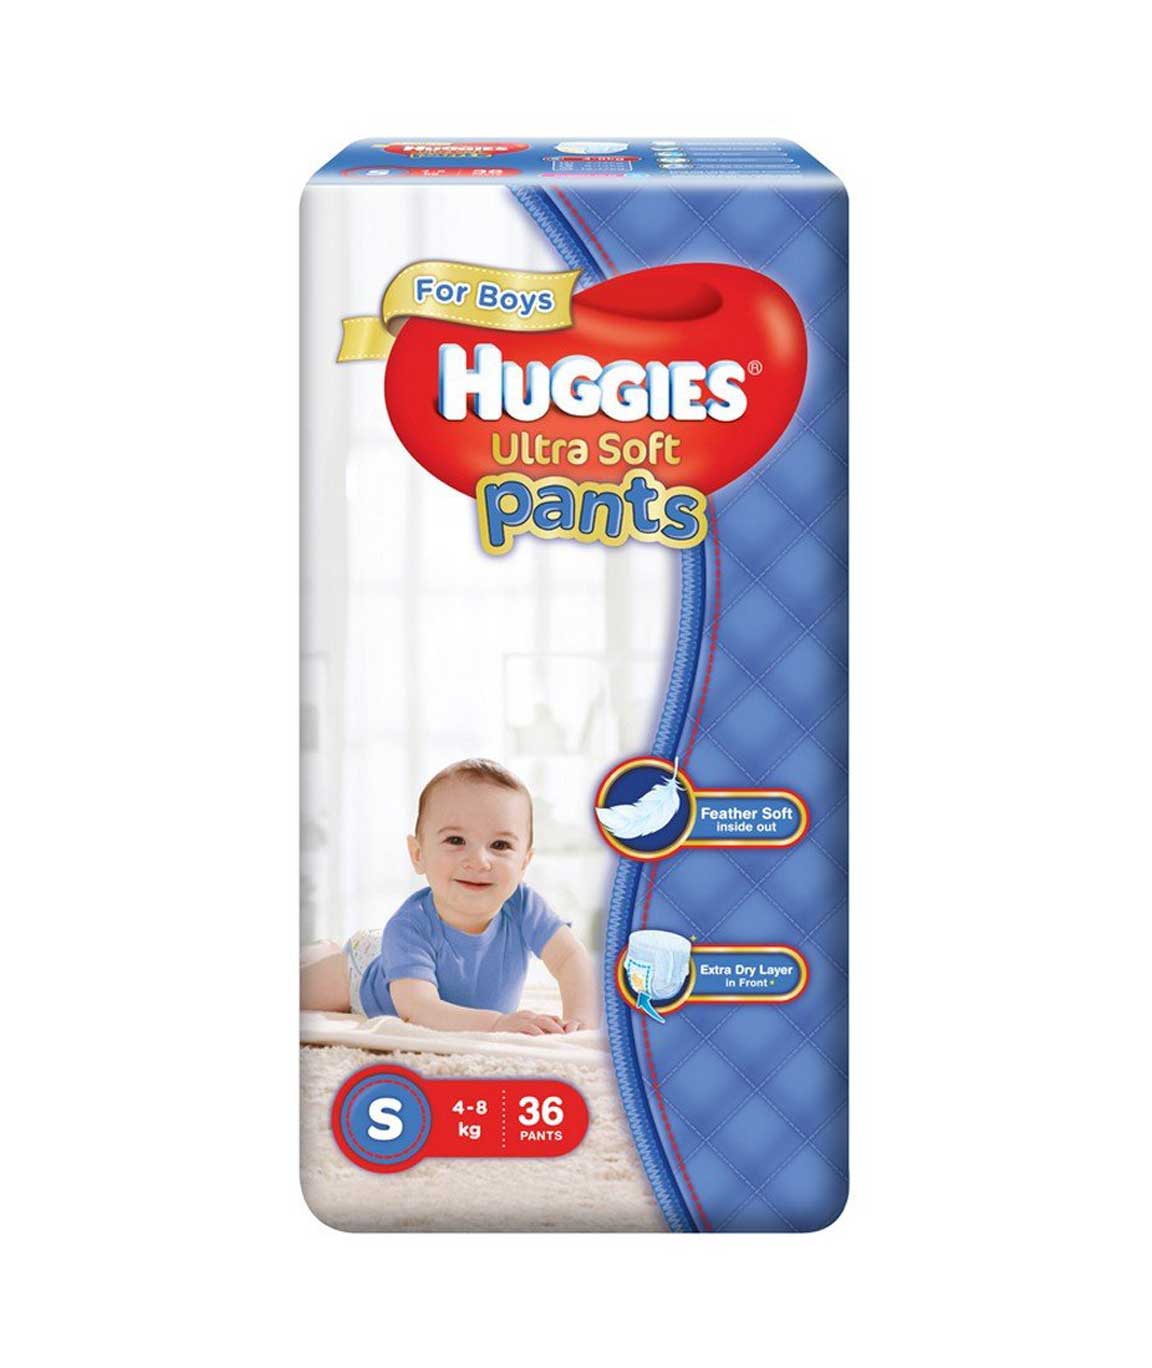 Huggies Ultra Soft Pants Diapers for Boys Small Pack of 36